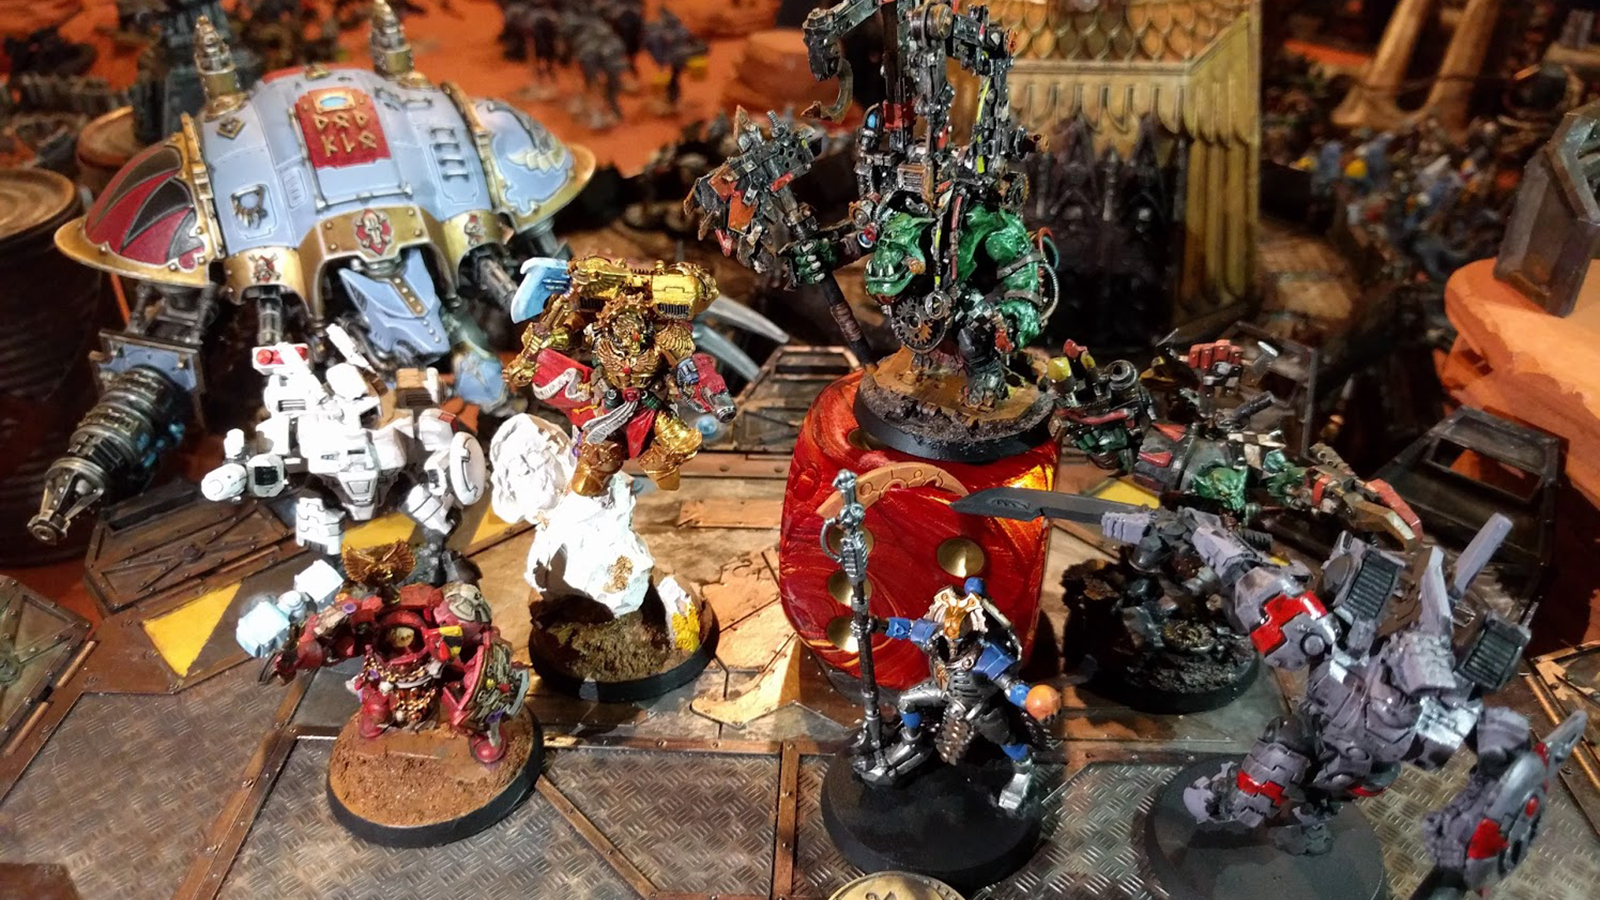 Team Waaagh with the Victory!